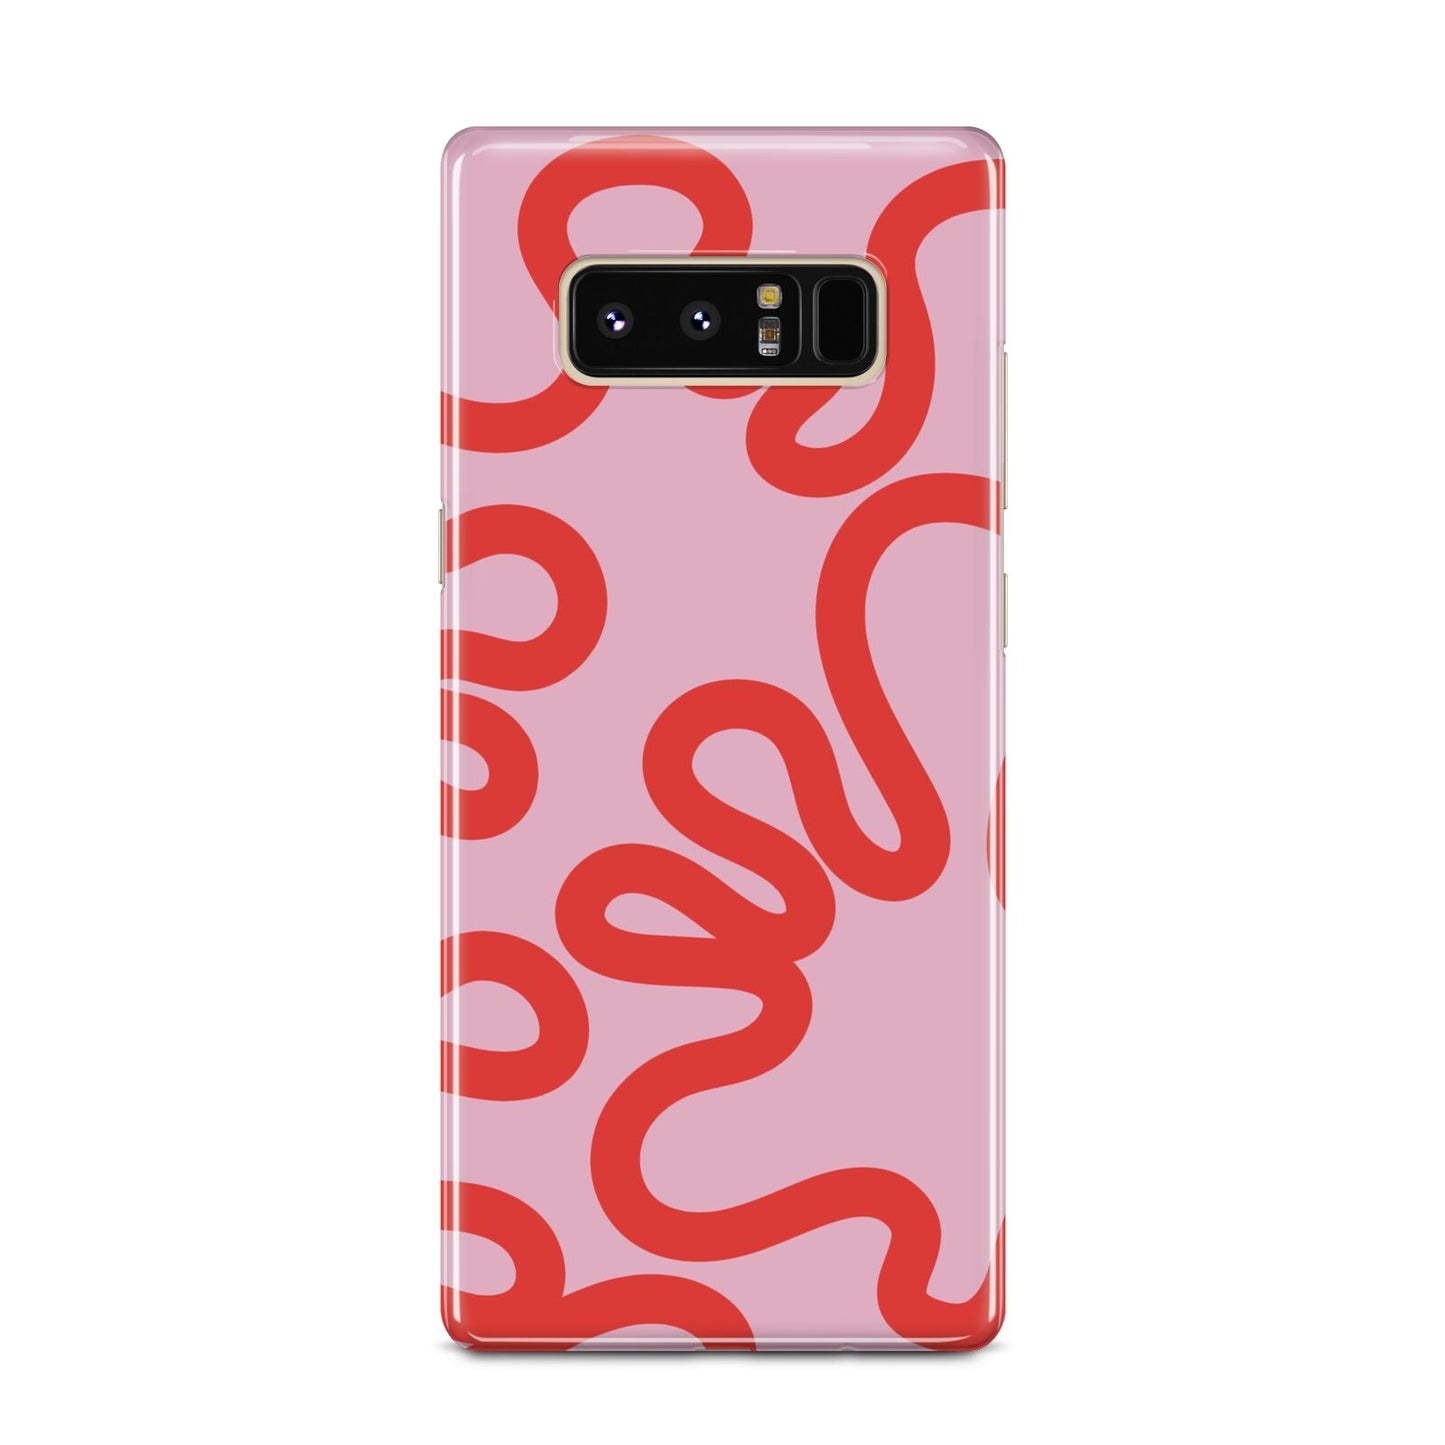 Squiggle Samsung Galaxy Note 8 Case